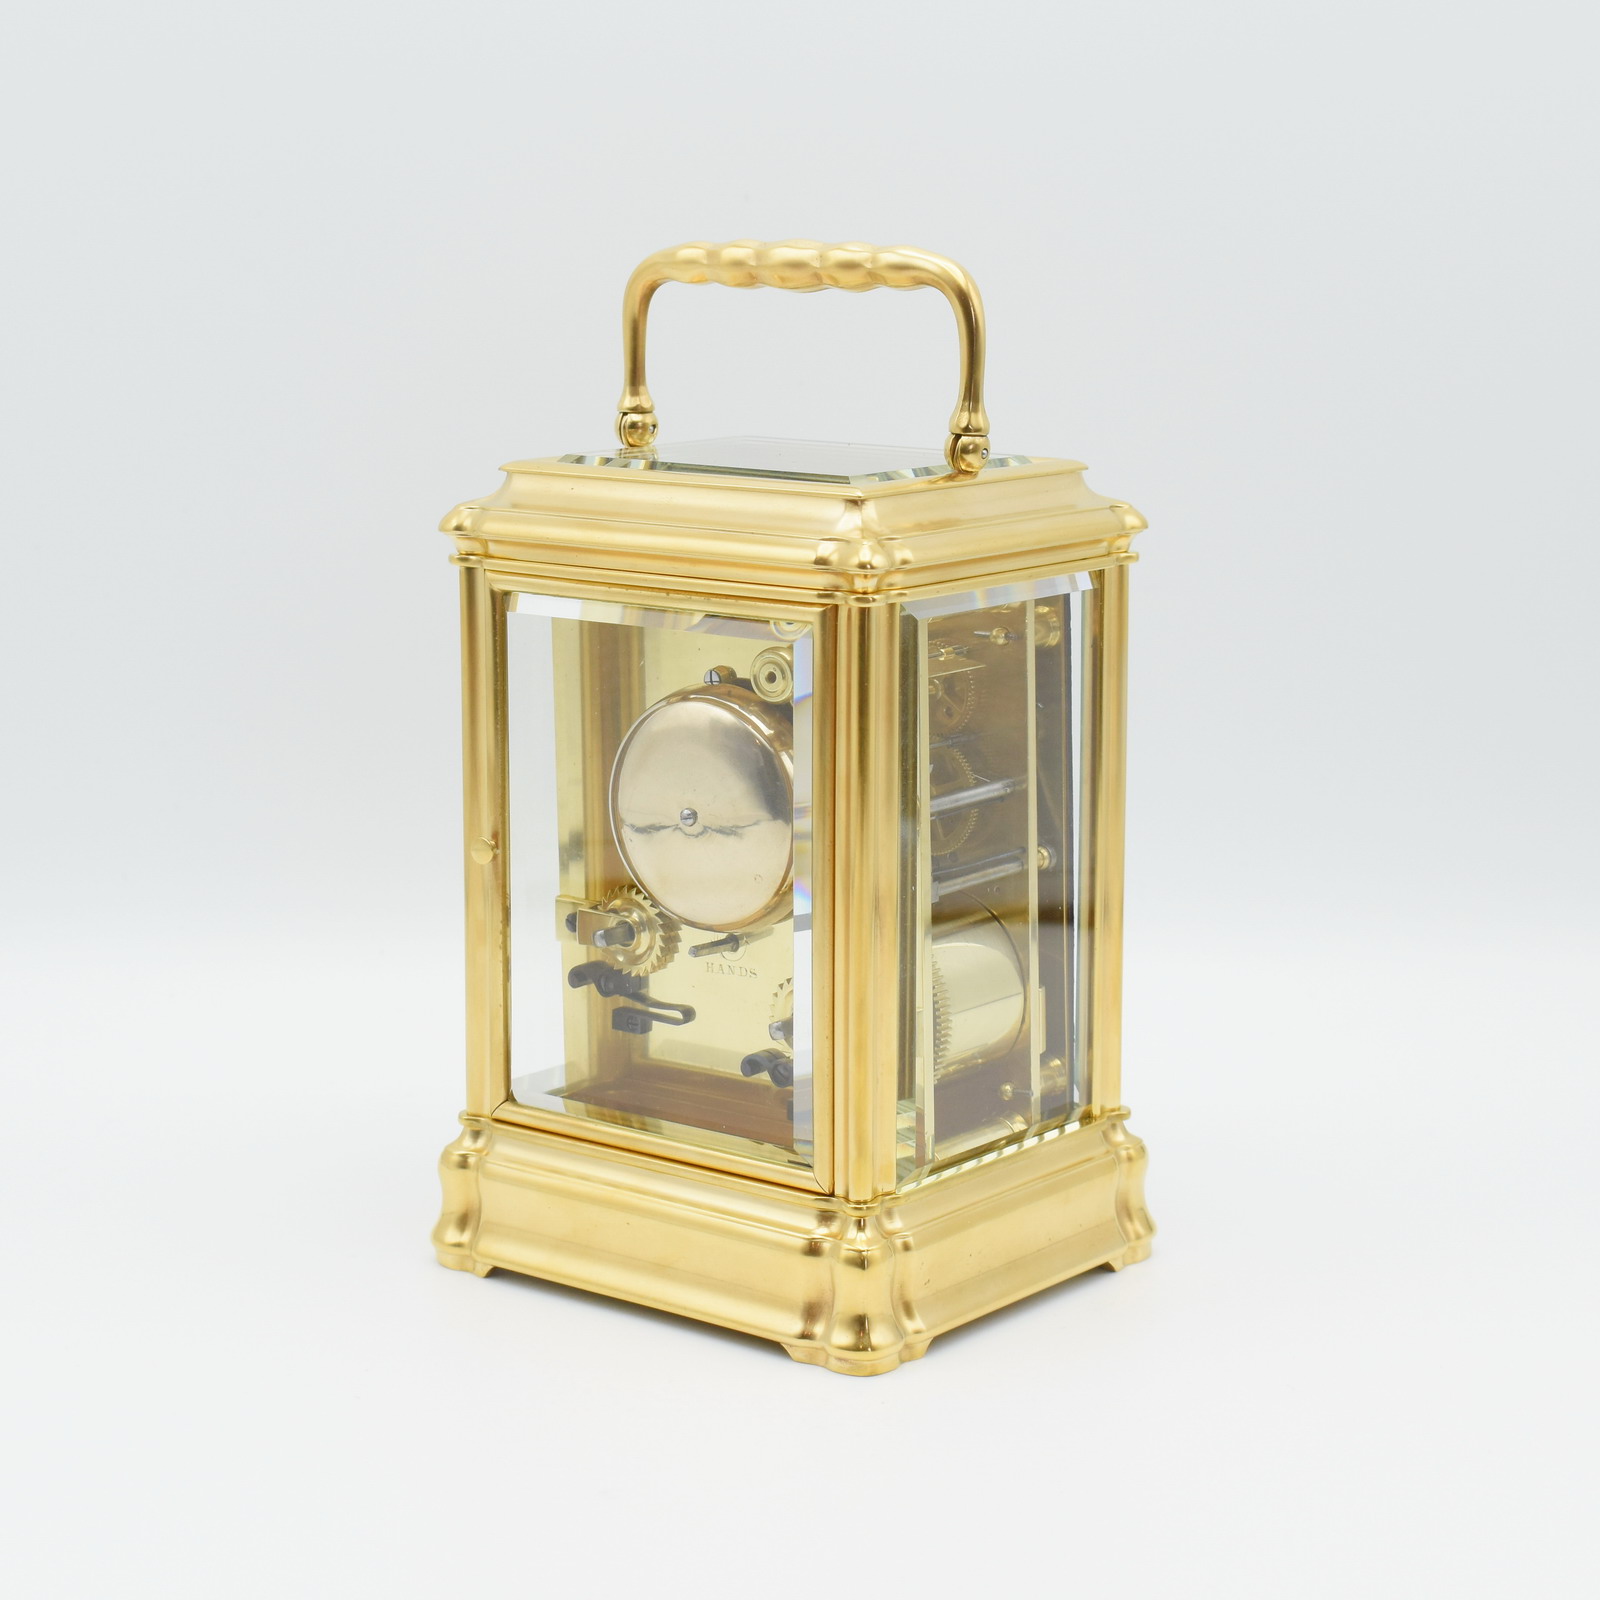 Brock – Henri Jacot Carriage Clock – It's About Time